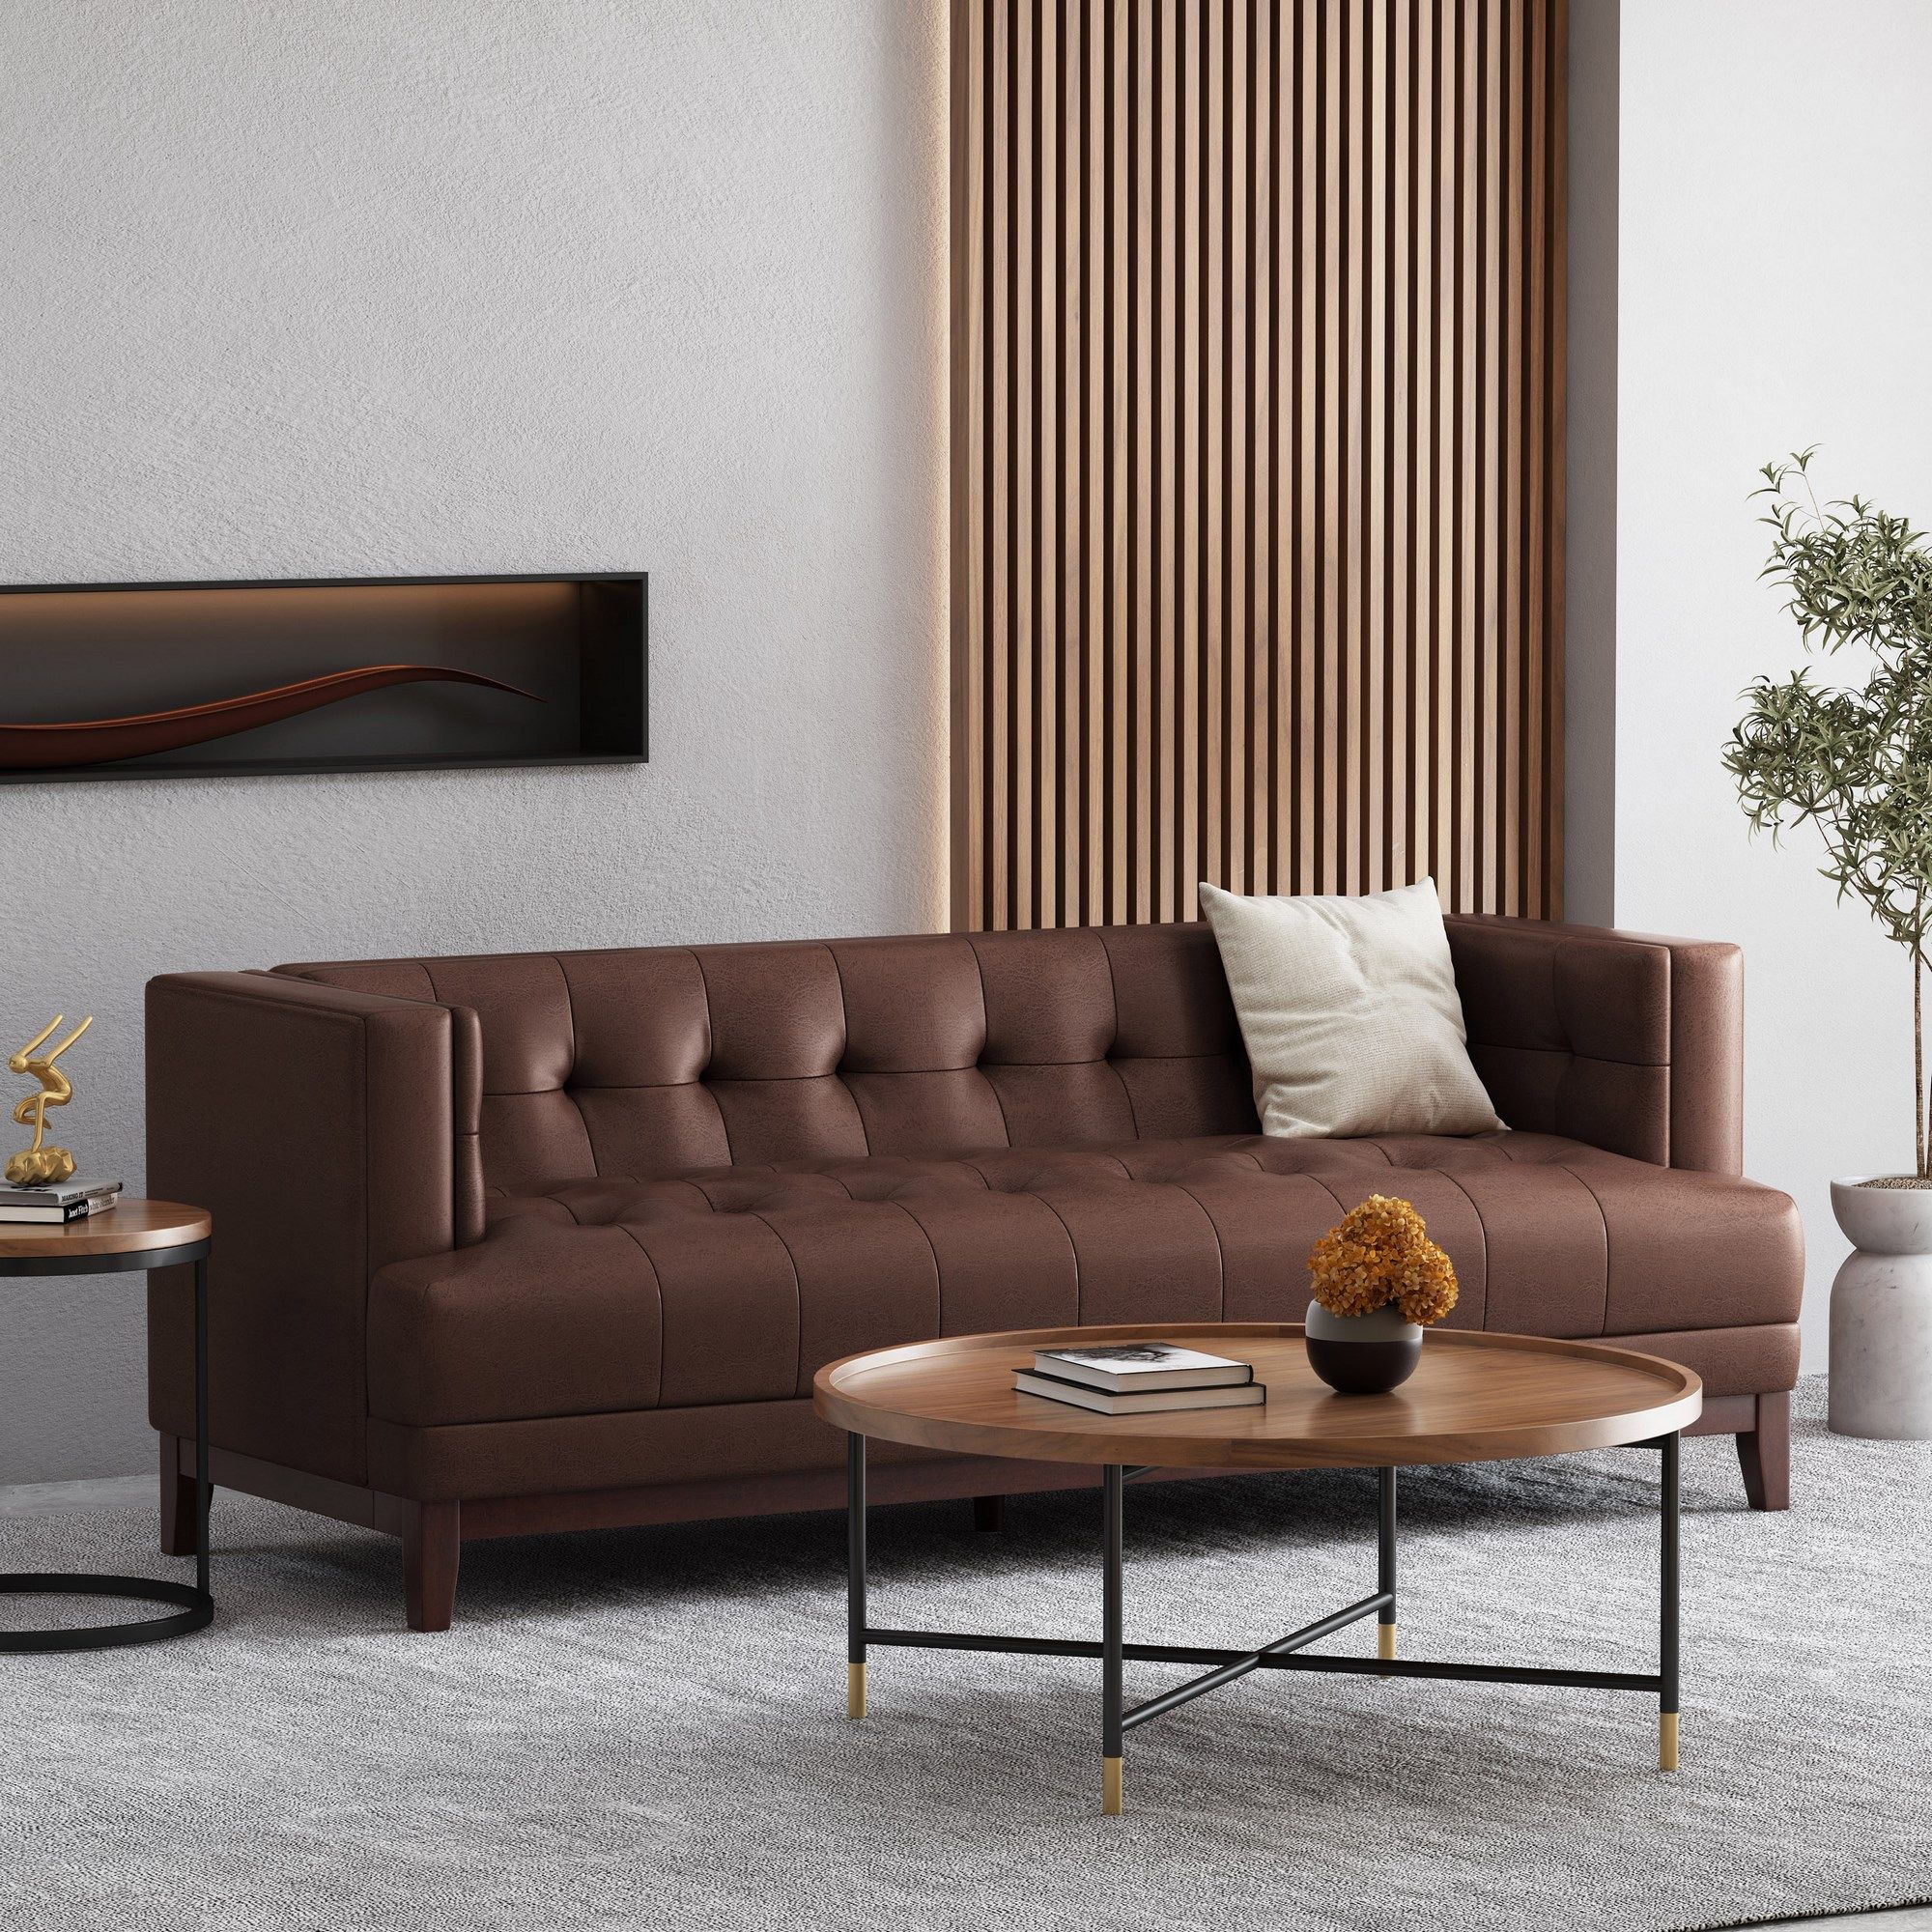 Raintree Mid Century Modern Faux Leather Tufted 3 Seater Sofa, Dark Brown  And Espresso Regarding Mid Century 3 Seat Couches (View 11 of 15)